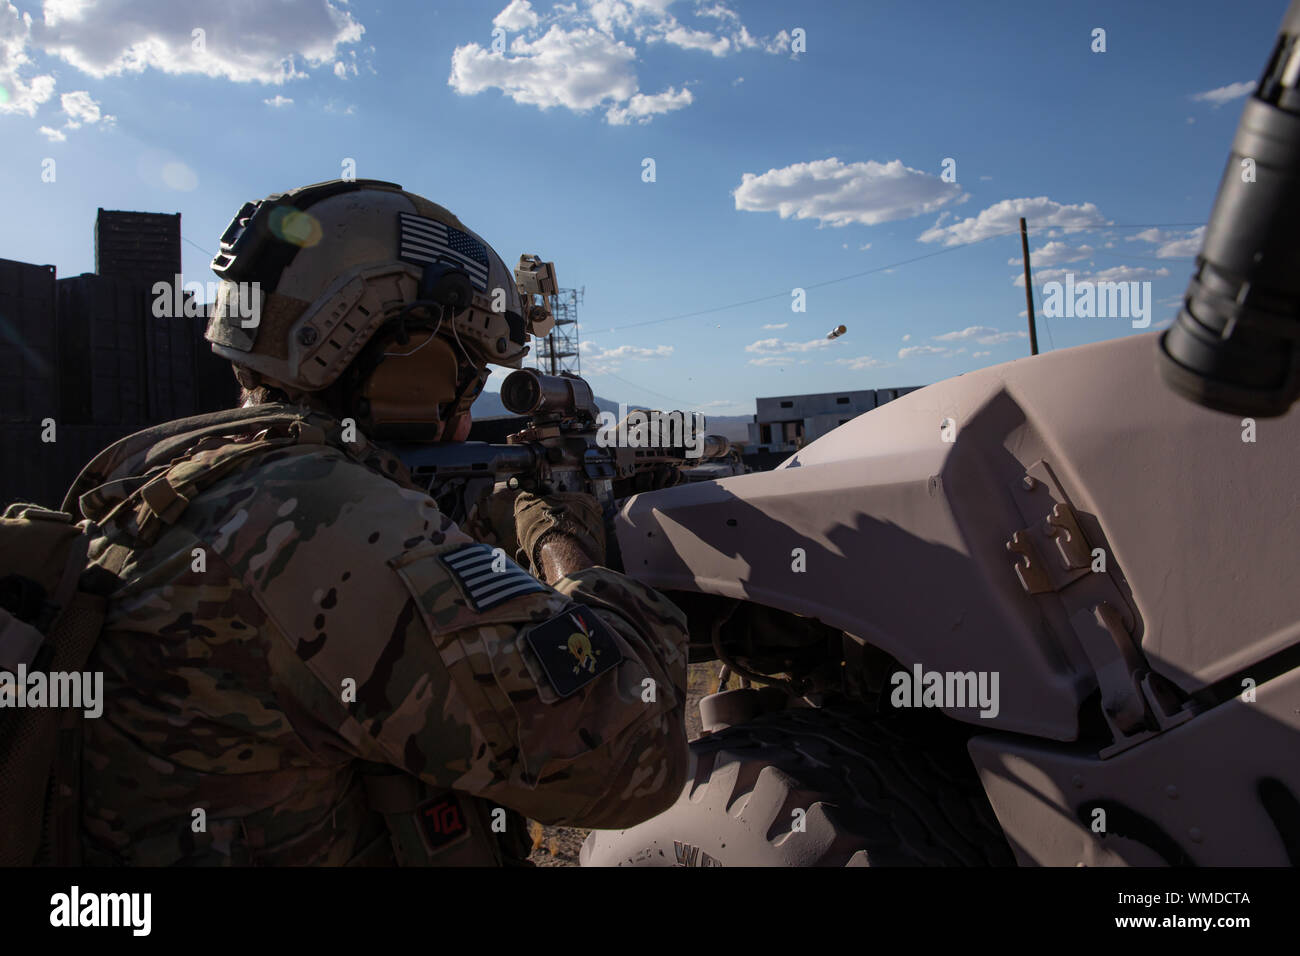 A Green Beret assigned to 3rd Special Forces Group (Airborne) fires his weapon while clearing a compound during a training event near Nellis Air Force Base, Nev. Aug. 27, 2019. U.S. Special Forces and U.S. Air Force Joint Terminal Attack Controllers conducted a raid and utilized multiple weapon systems ranging from smalls arms weapons to A-10 Thunderbolt ll aircraft. (U.S. Army photo by Sgt. Steven Lewis) Stock Photo